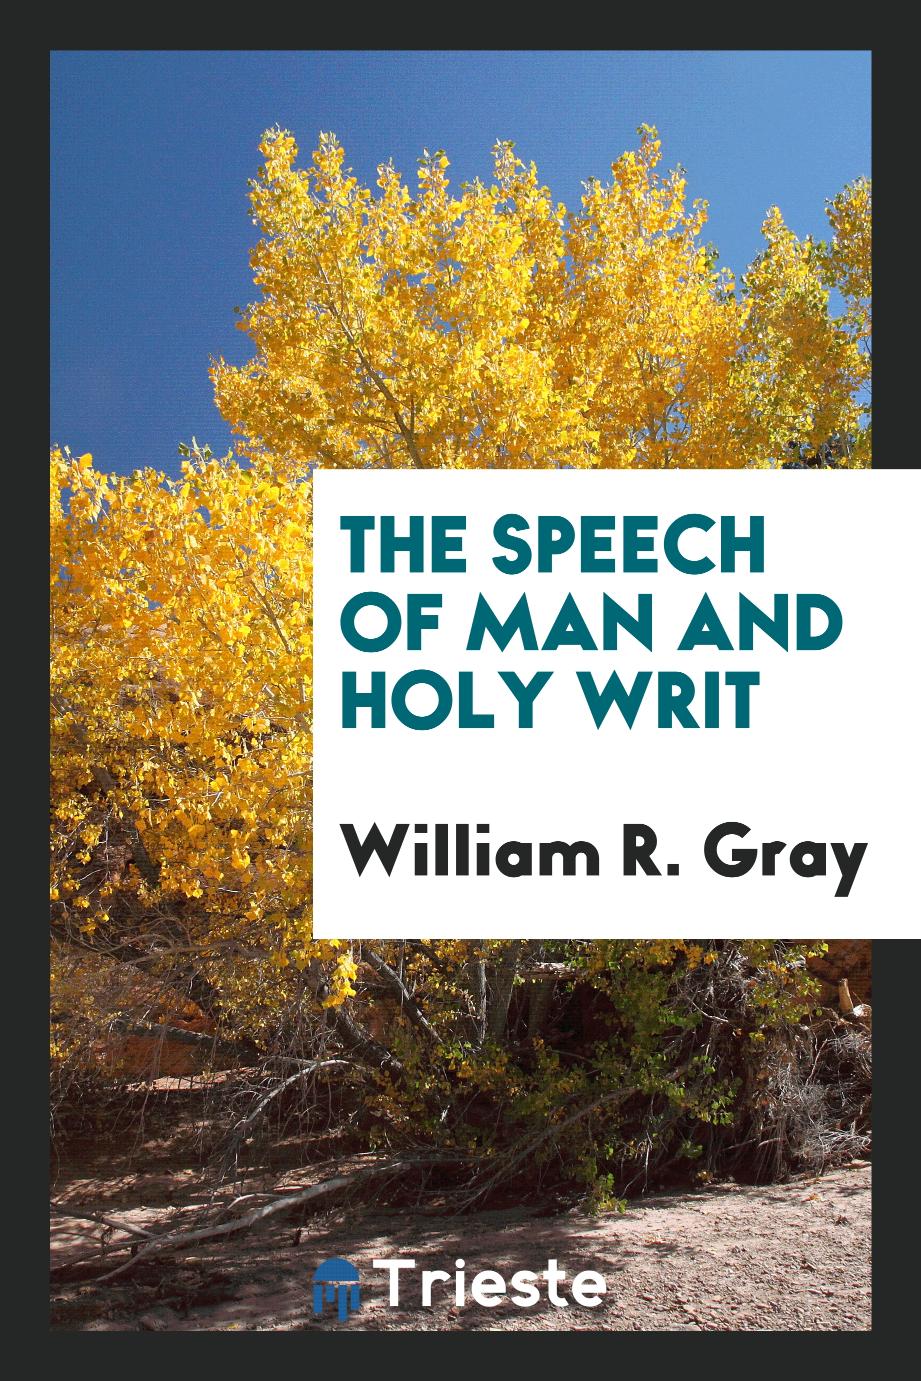 The speech of man and Holy Writ